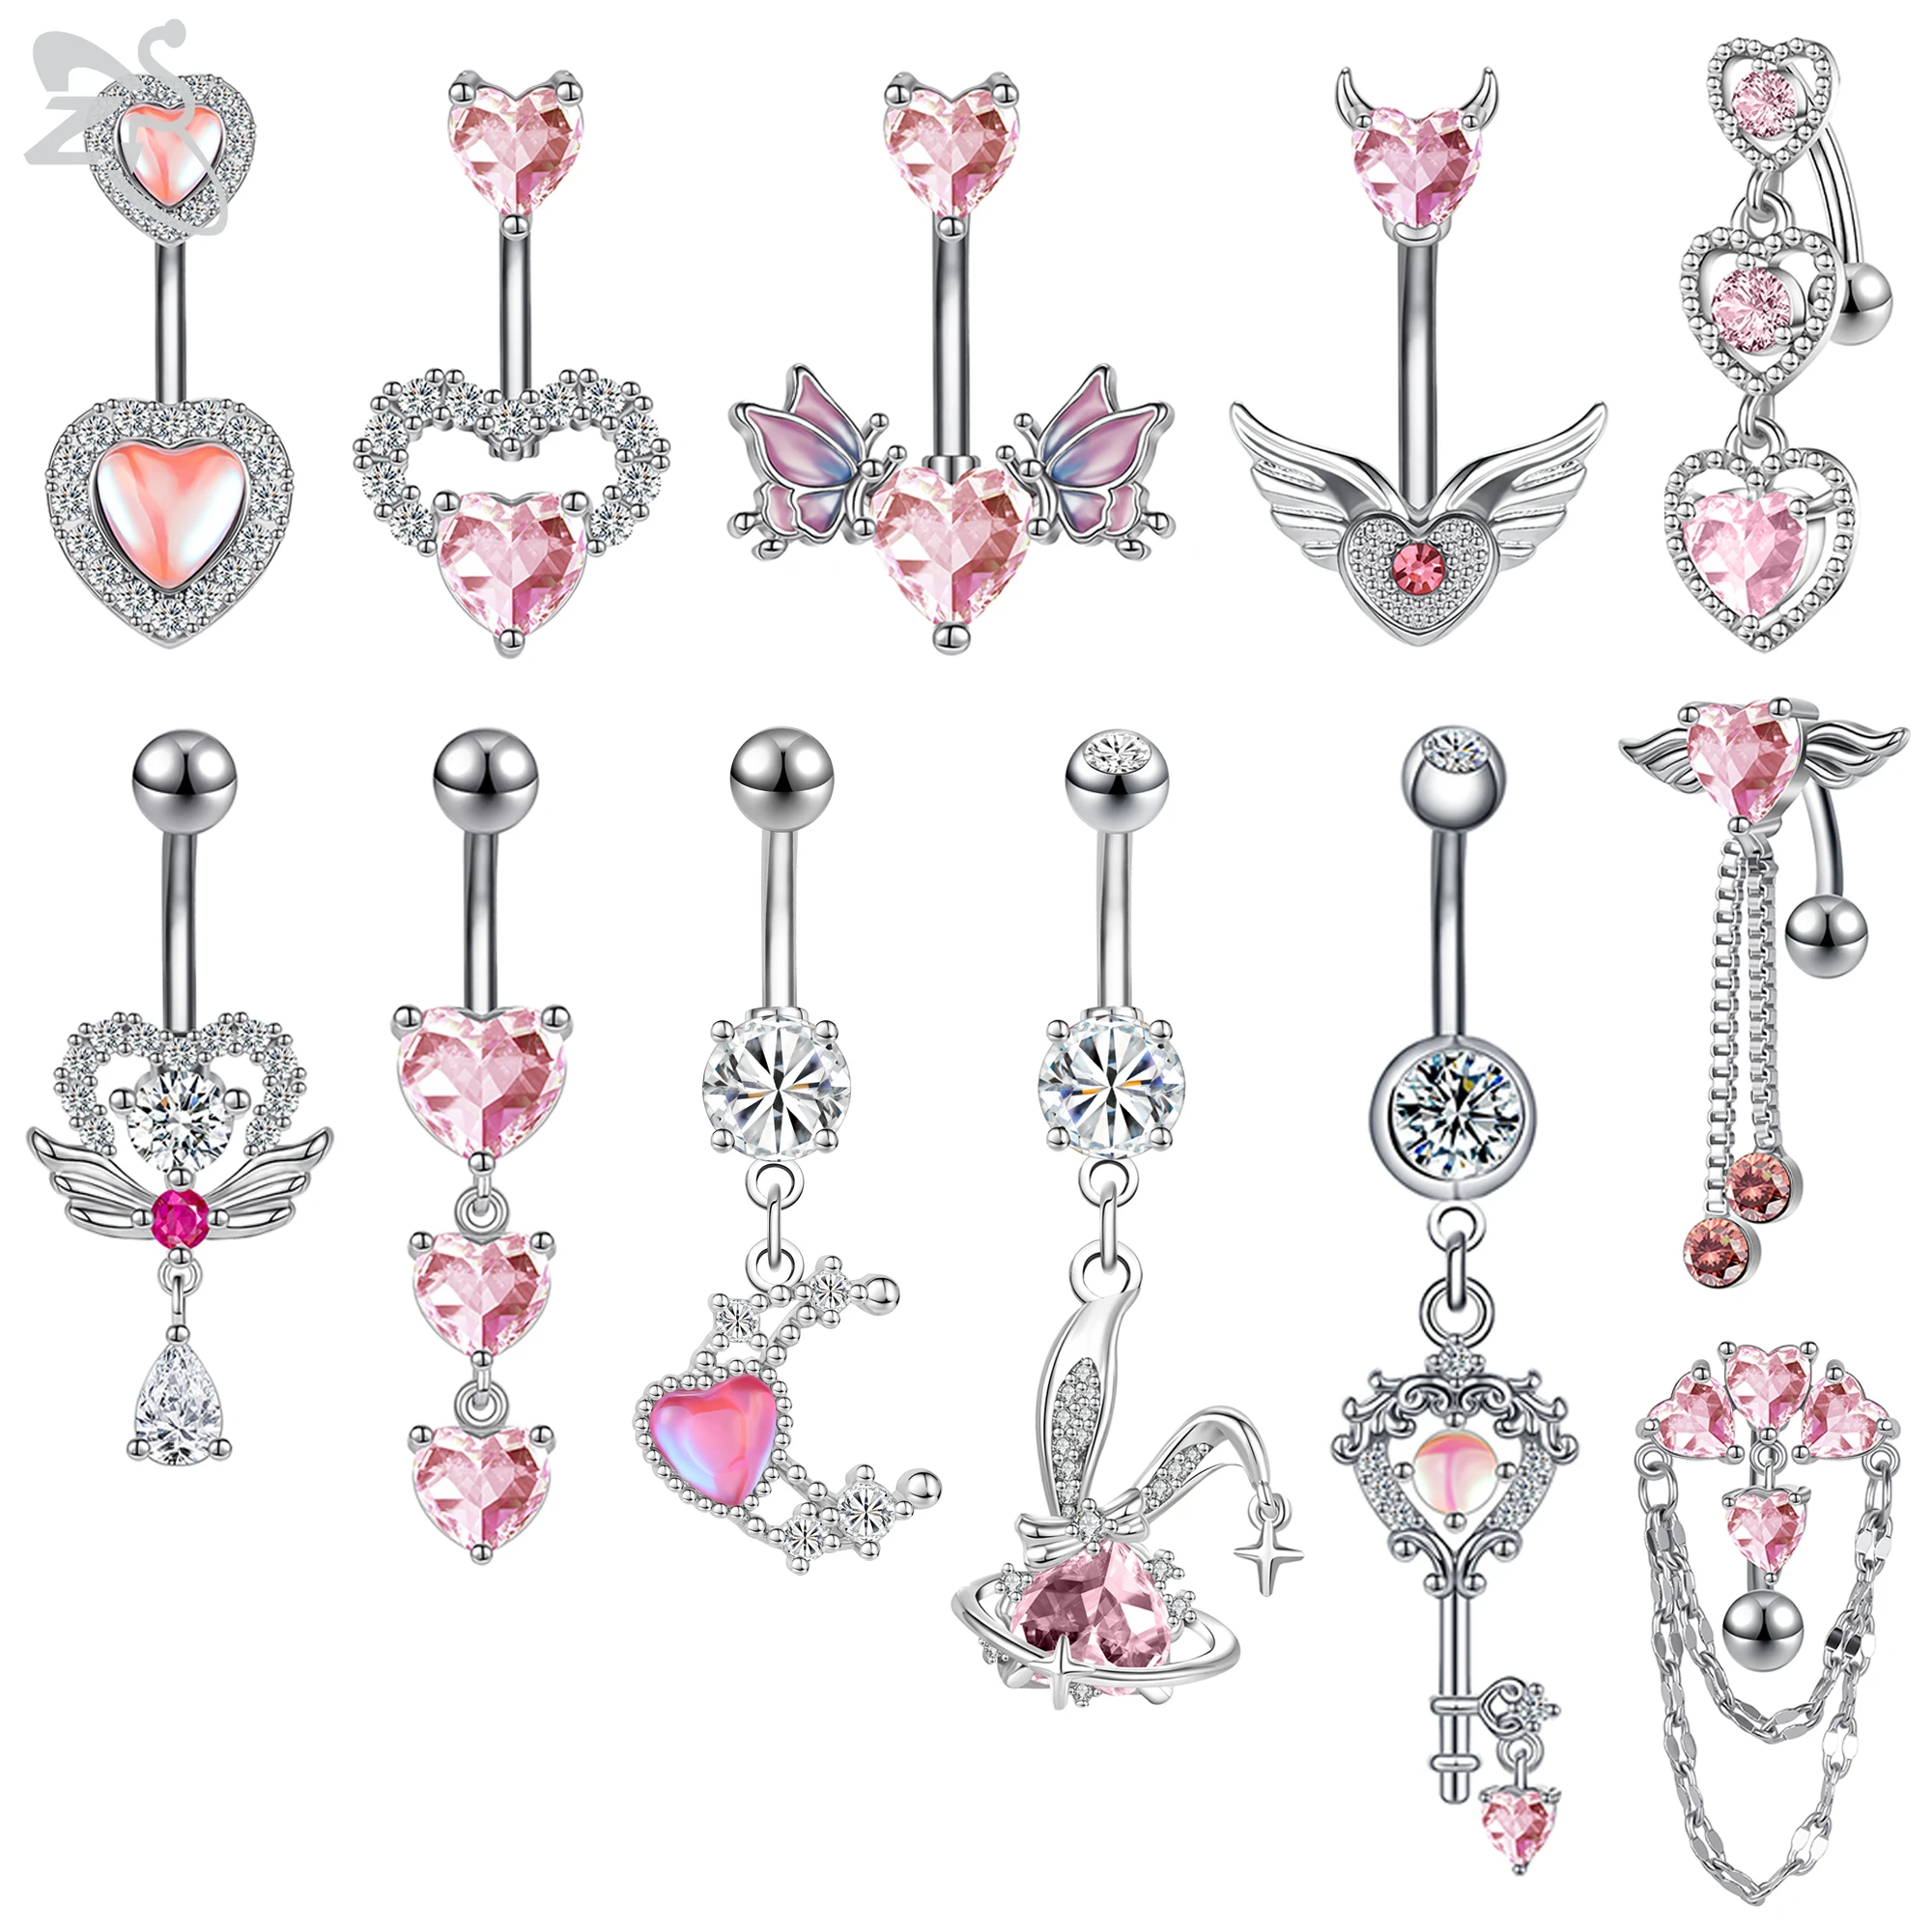 ZS 1 Piece Pink CZ Crystal Pendant Belly Button Rings Cute Heart Butterfly Flower Stainless Steel Navel Piercings Body Jewelry